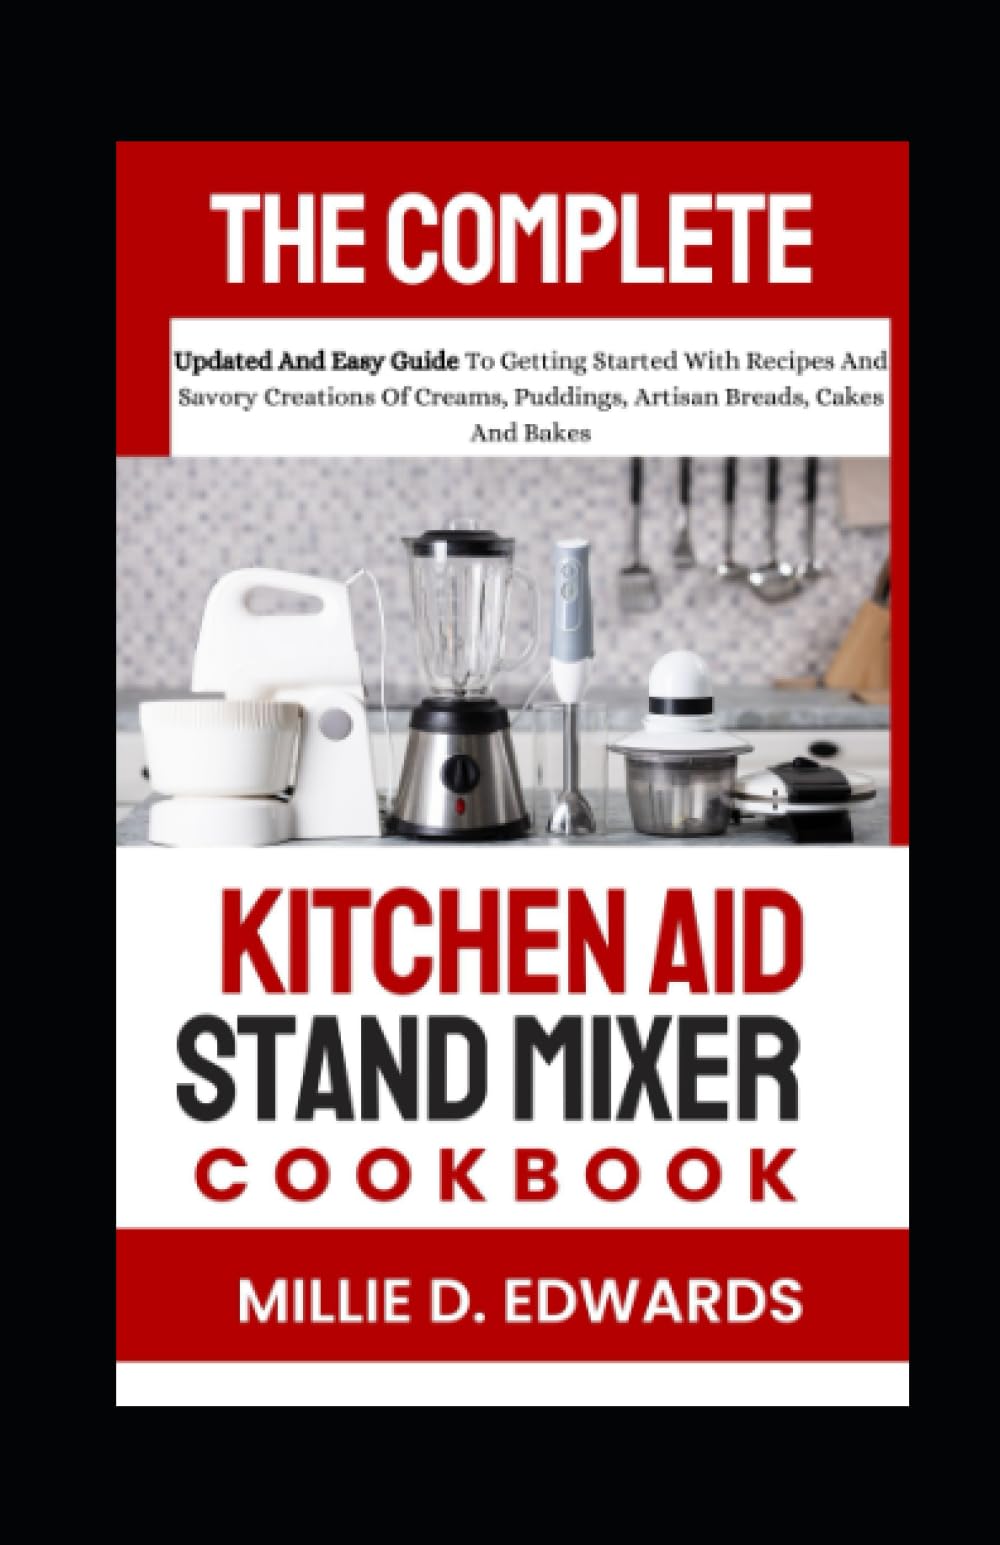 The Complete Kitchen Aid Stand Mixer Cookbook: Updated And Easy Guide To Getting Started With Recipes And Savory Creations Of Creams, Puddings, Artisan Breads, Cakes And Bakes